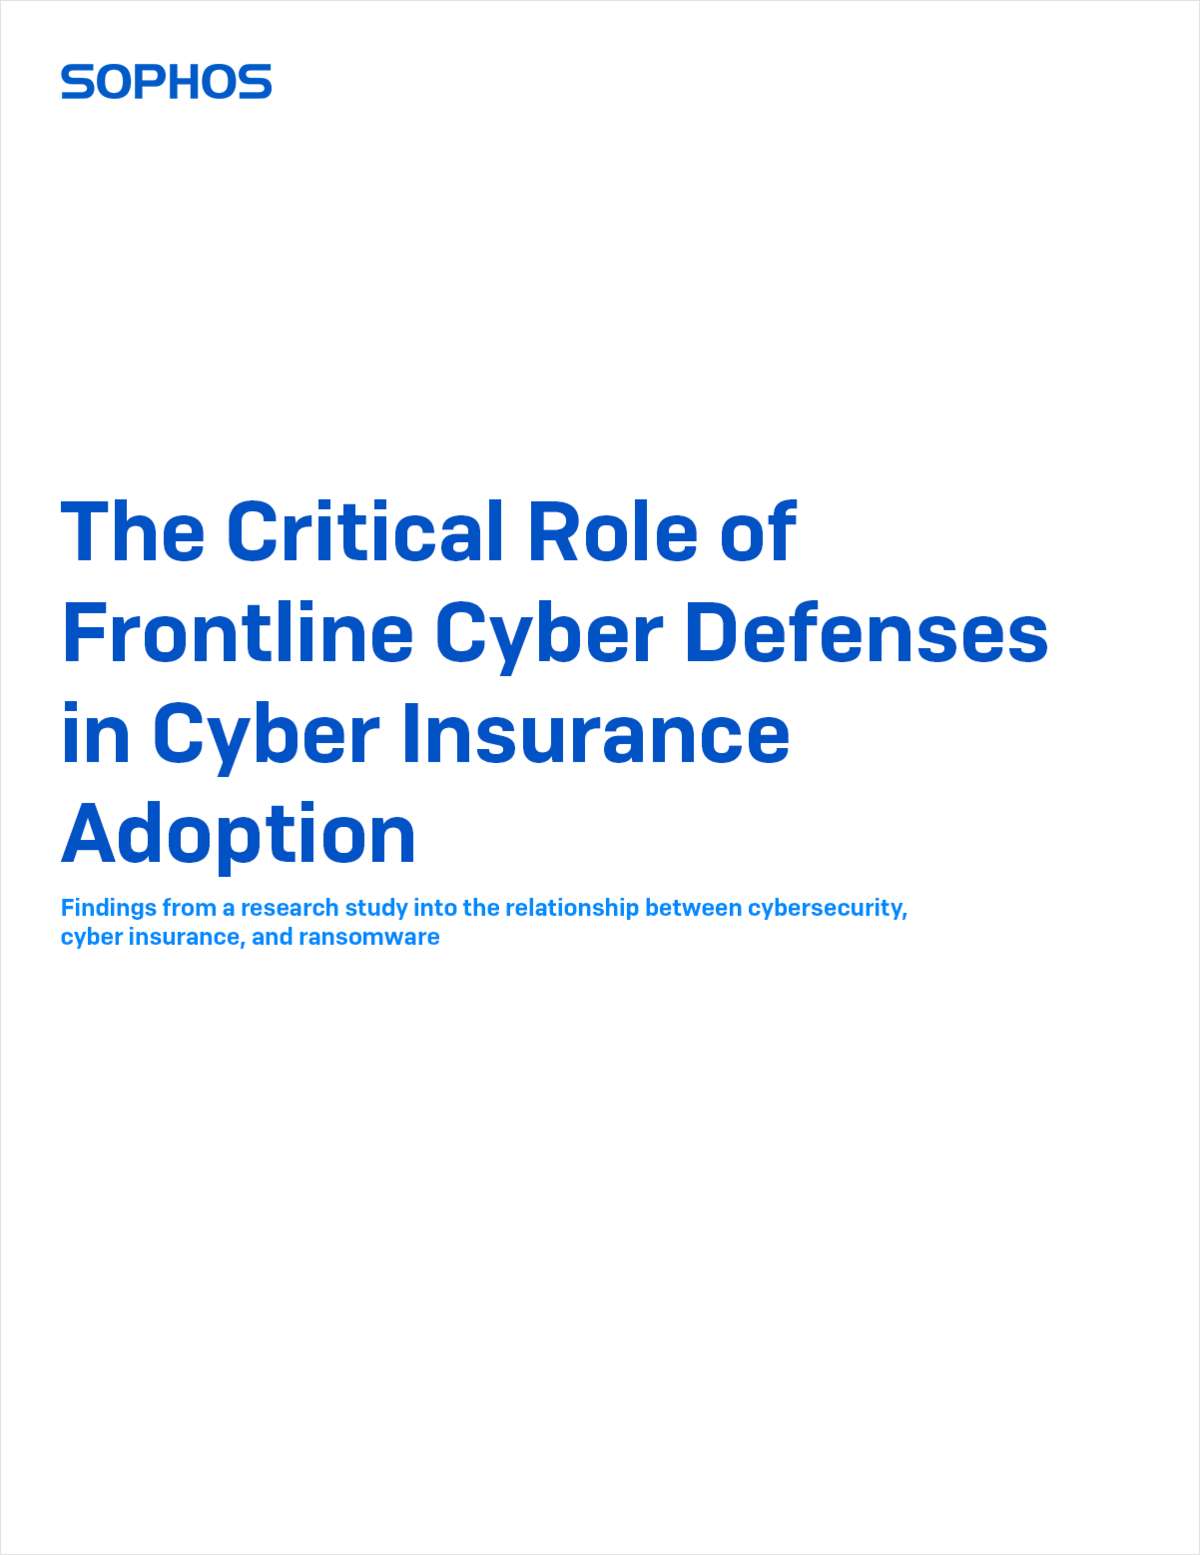 The Critical Role of Frontline Cyber Defenses in Cyber Insurance Adoption